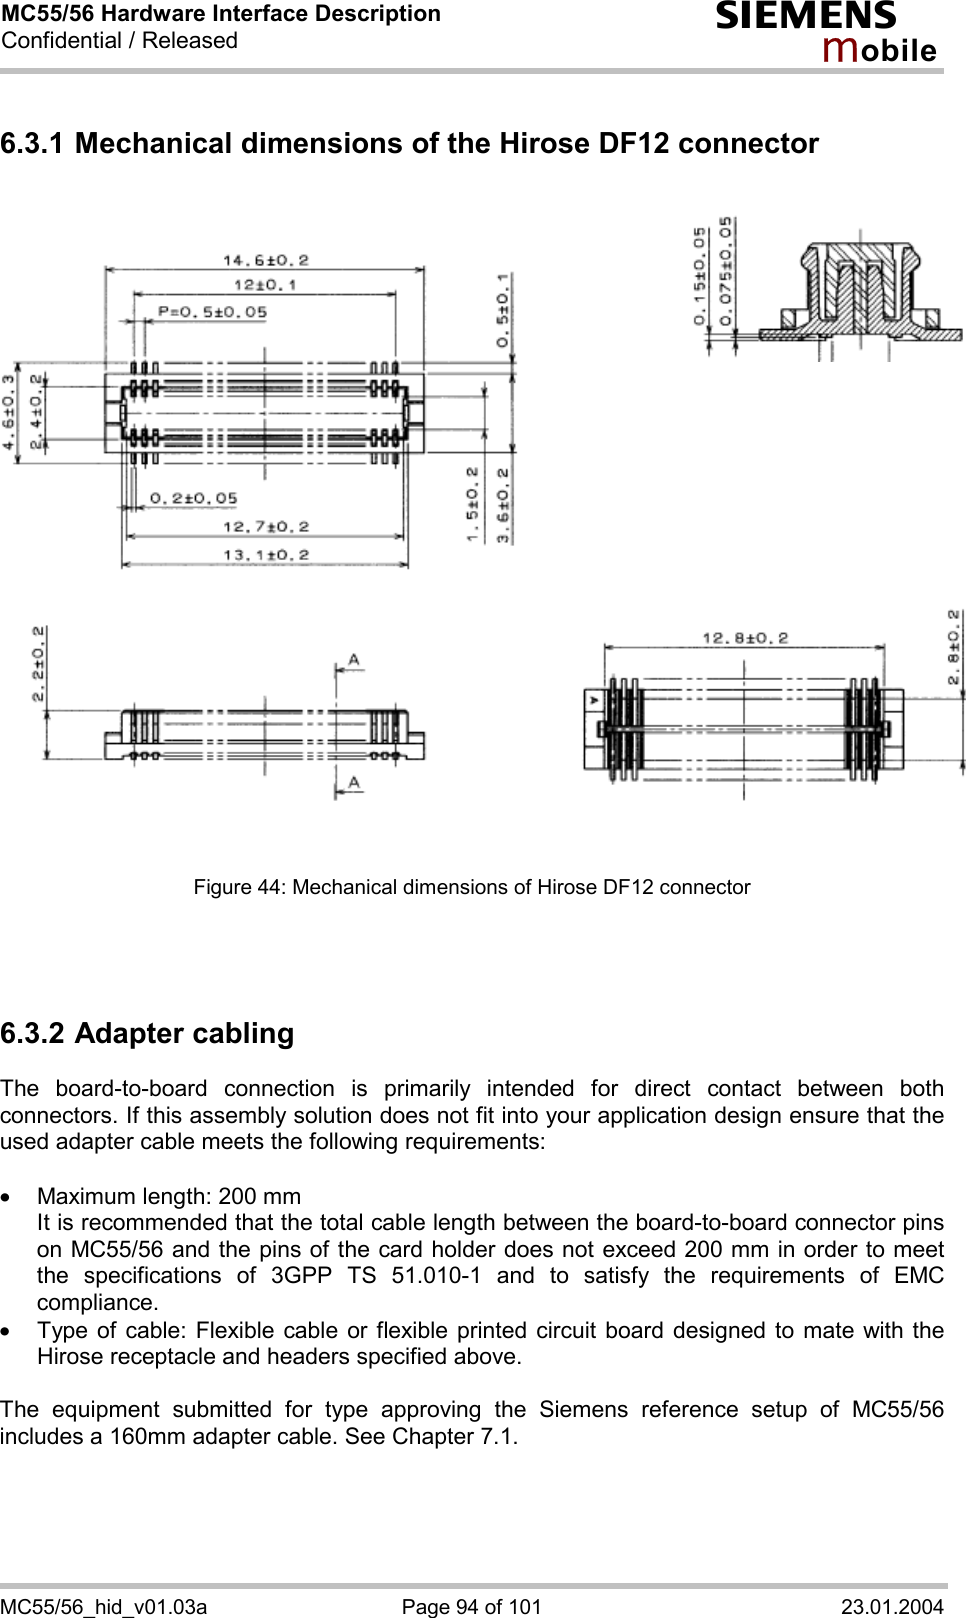 MC55/56 Hardware Interface Description Confidential / Released s mo b i l e MC55/56_hid_v01.03a  Page 94 of 101  23.01.2004 6.3.1 Mechanical dimensions of the Hirose DF12 connector                 Figure 44: Mechanical dimensions of Hirose DF12 connector    6.3.2 Adapter cabling The board-to-board connection is primarily intended for direct contact between both connectors. If this assembly solution does not fit into your application design ensure that the used adapter cable meets the following requirements:  ·  Maximum length: 200 mm It is recommended that the total cable length between the board-to-board connector pins on MC55/56 and the pins of the card holder does not exceed 200 mm in order to meet the specifications of 3GPP TS 51.010-1 and to satisfy the requirements of EMC compliance. ·  Type of cable: Flexible cable or flexible printed circuit board designed to mate with the Hirose receptacle and headers specified above.   The equipment submitted for type approving the Siemens reference setup of MC55/56 includes a 160mm adapter cable. See Chapter 7.1.  